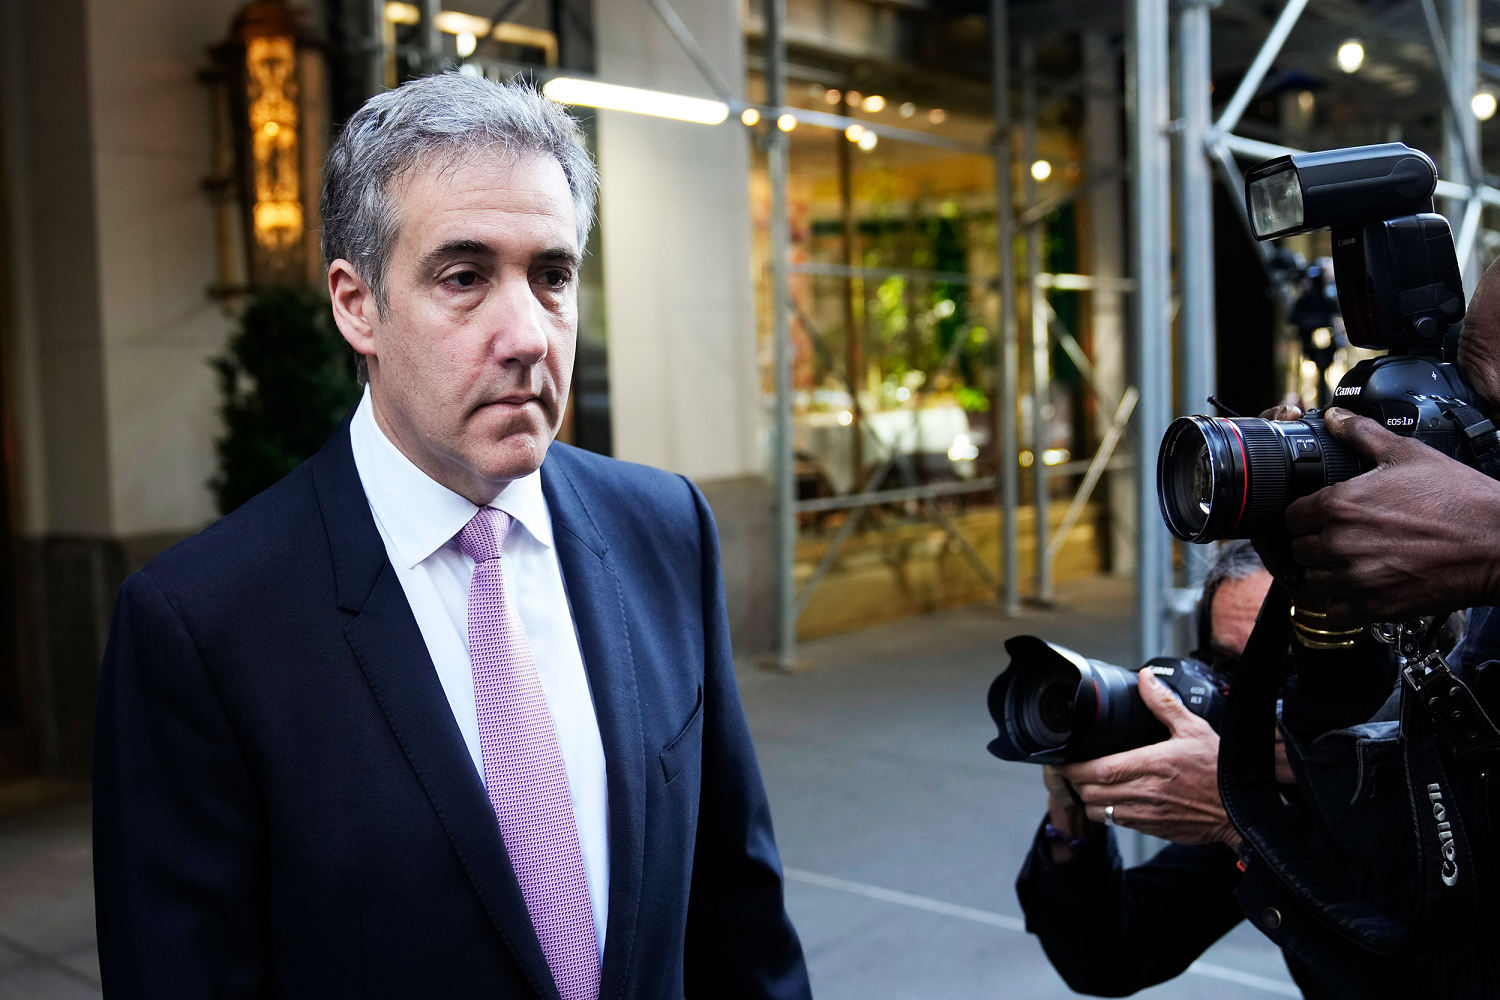 The exact moment Trump's lawyer cracked the prosecution's image of Michael Cohen